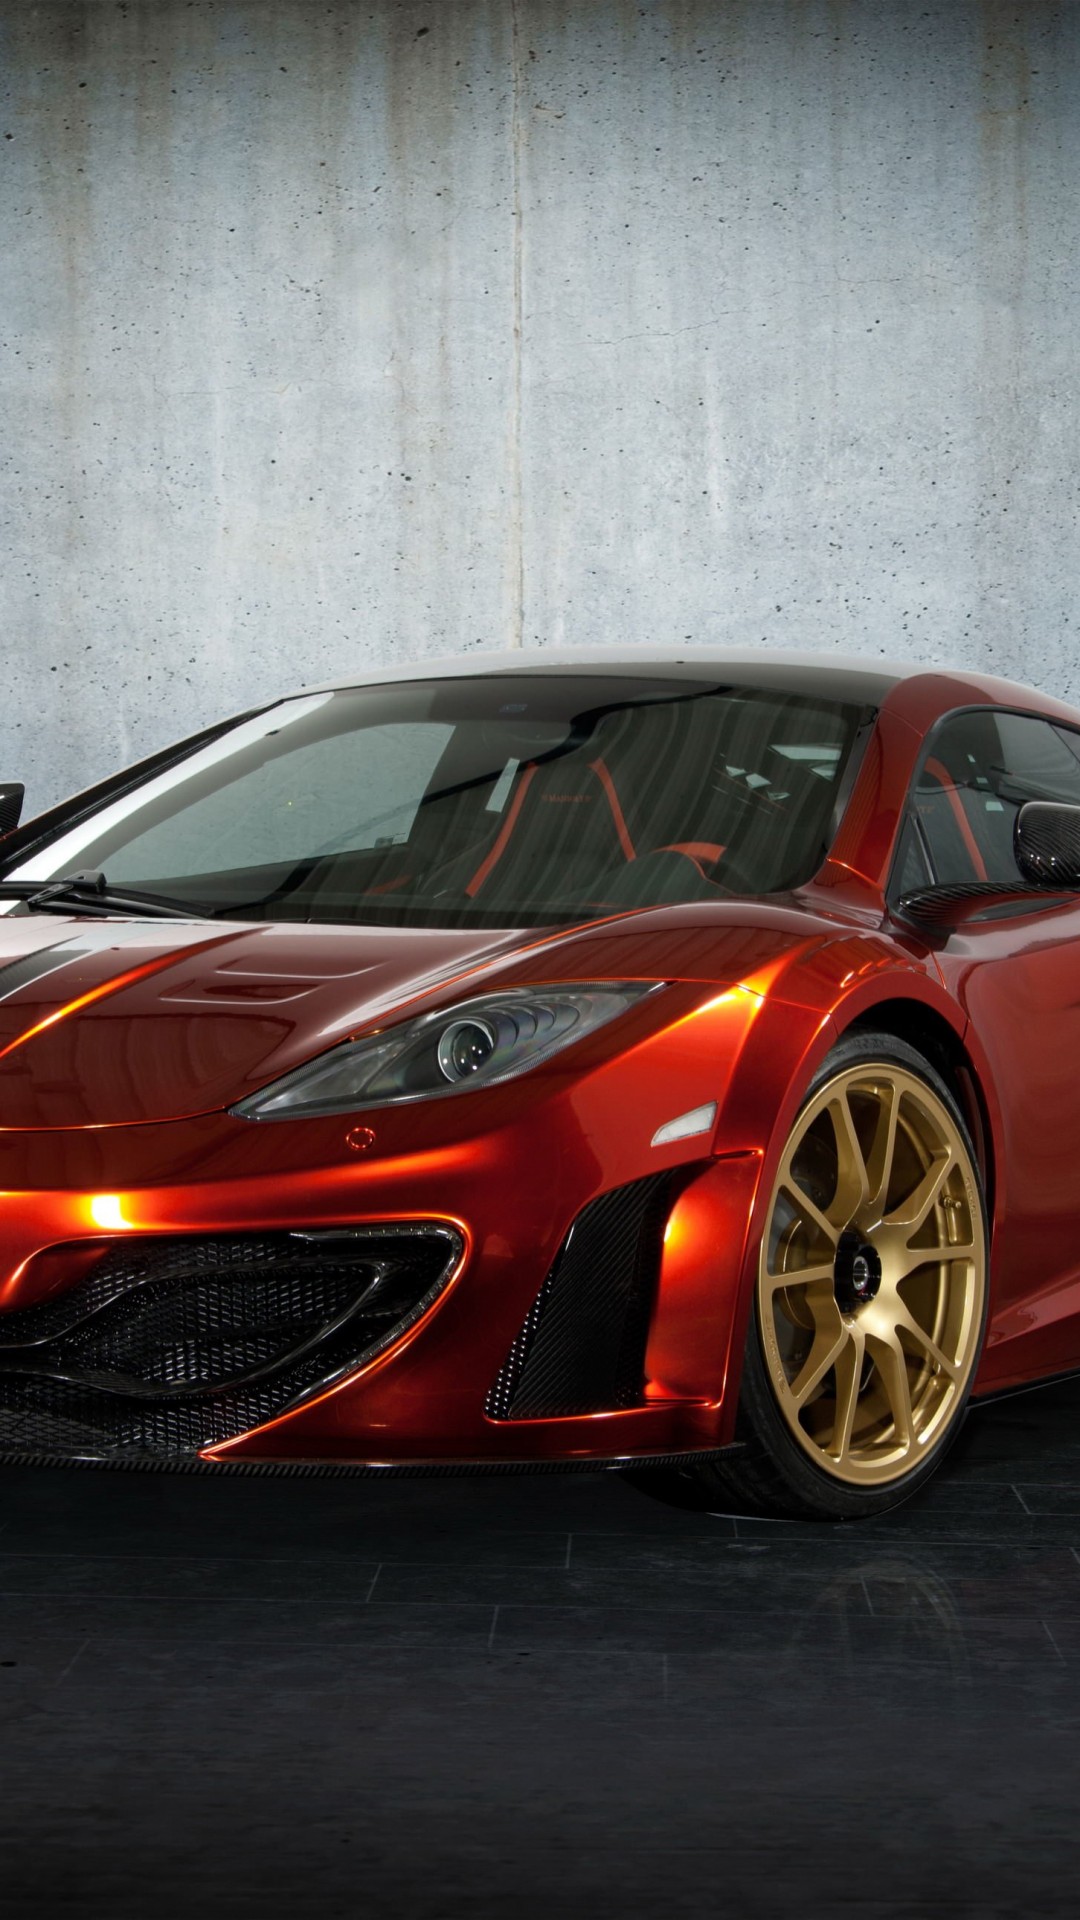 McLaren MP4-12Cf By Mansory Wallpaper for HTC One